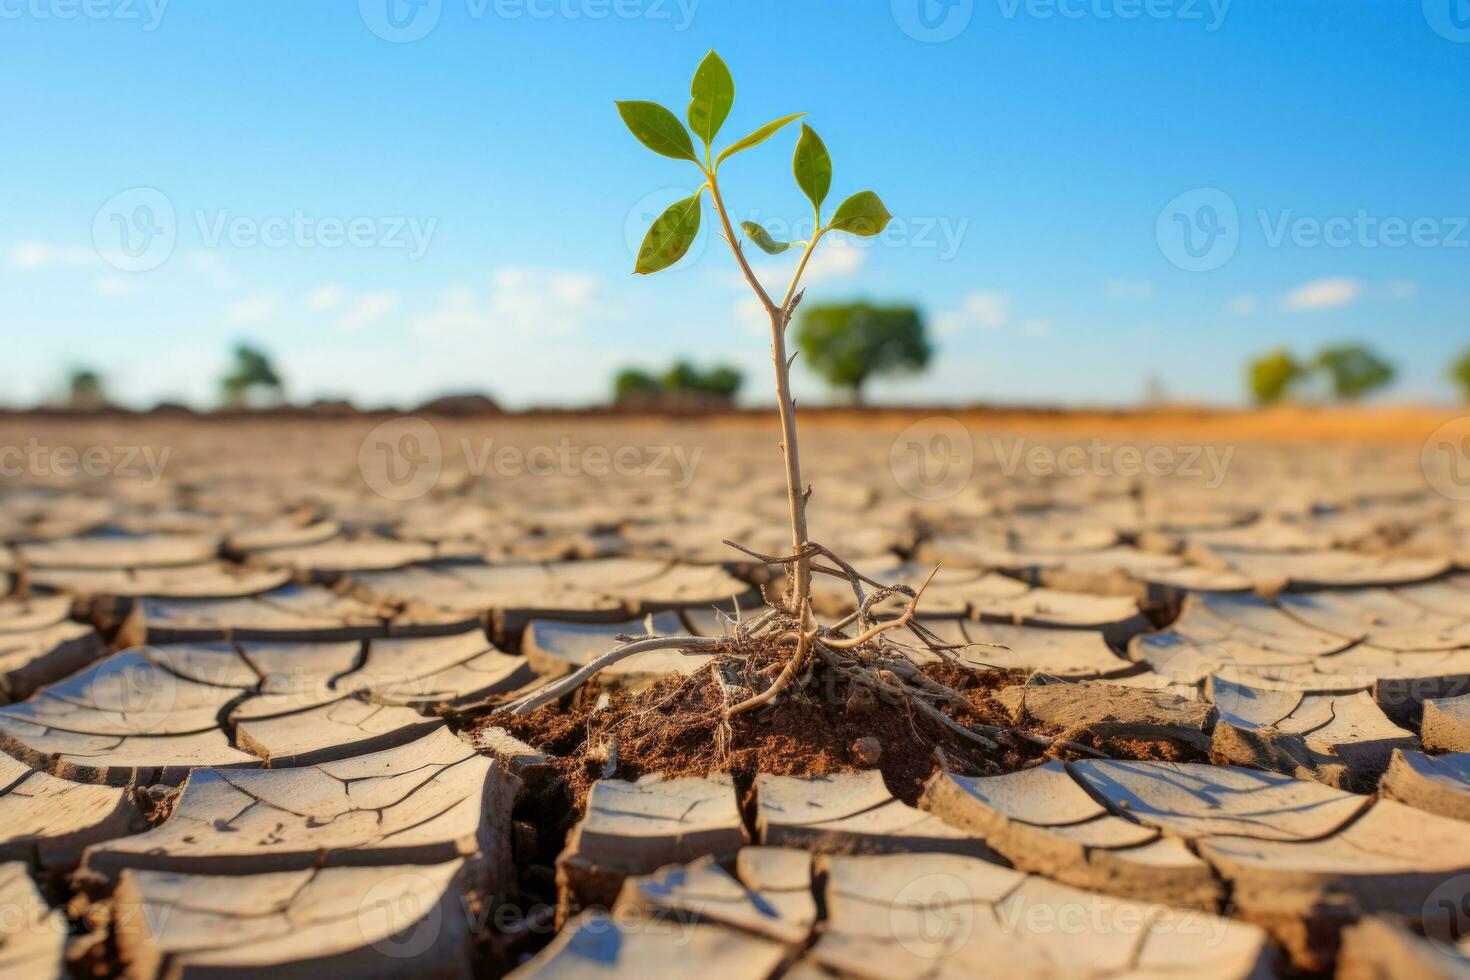 From drought to green growth the description of climate change photo